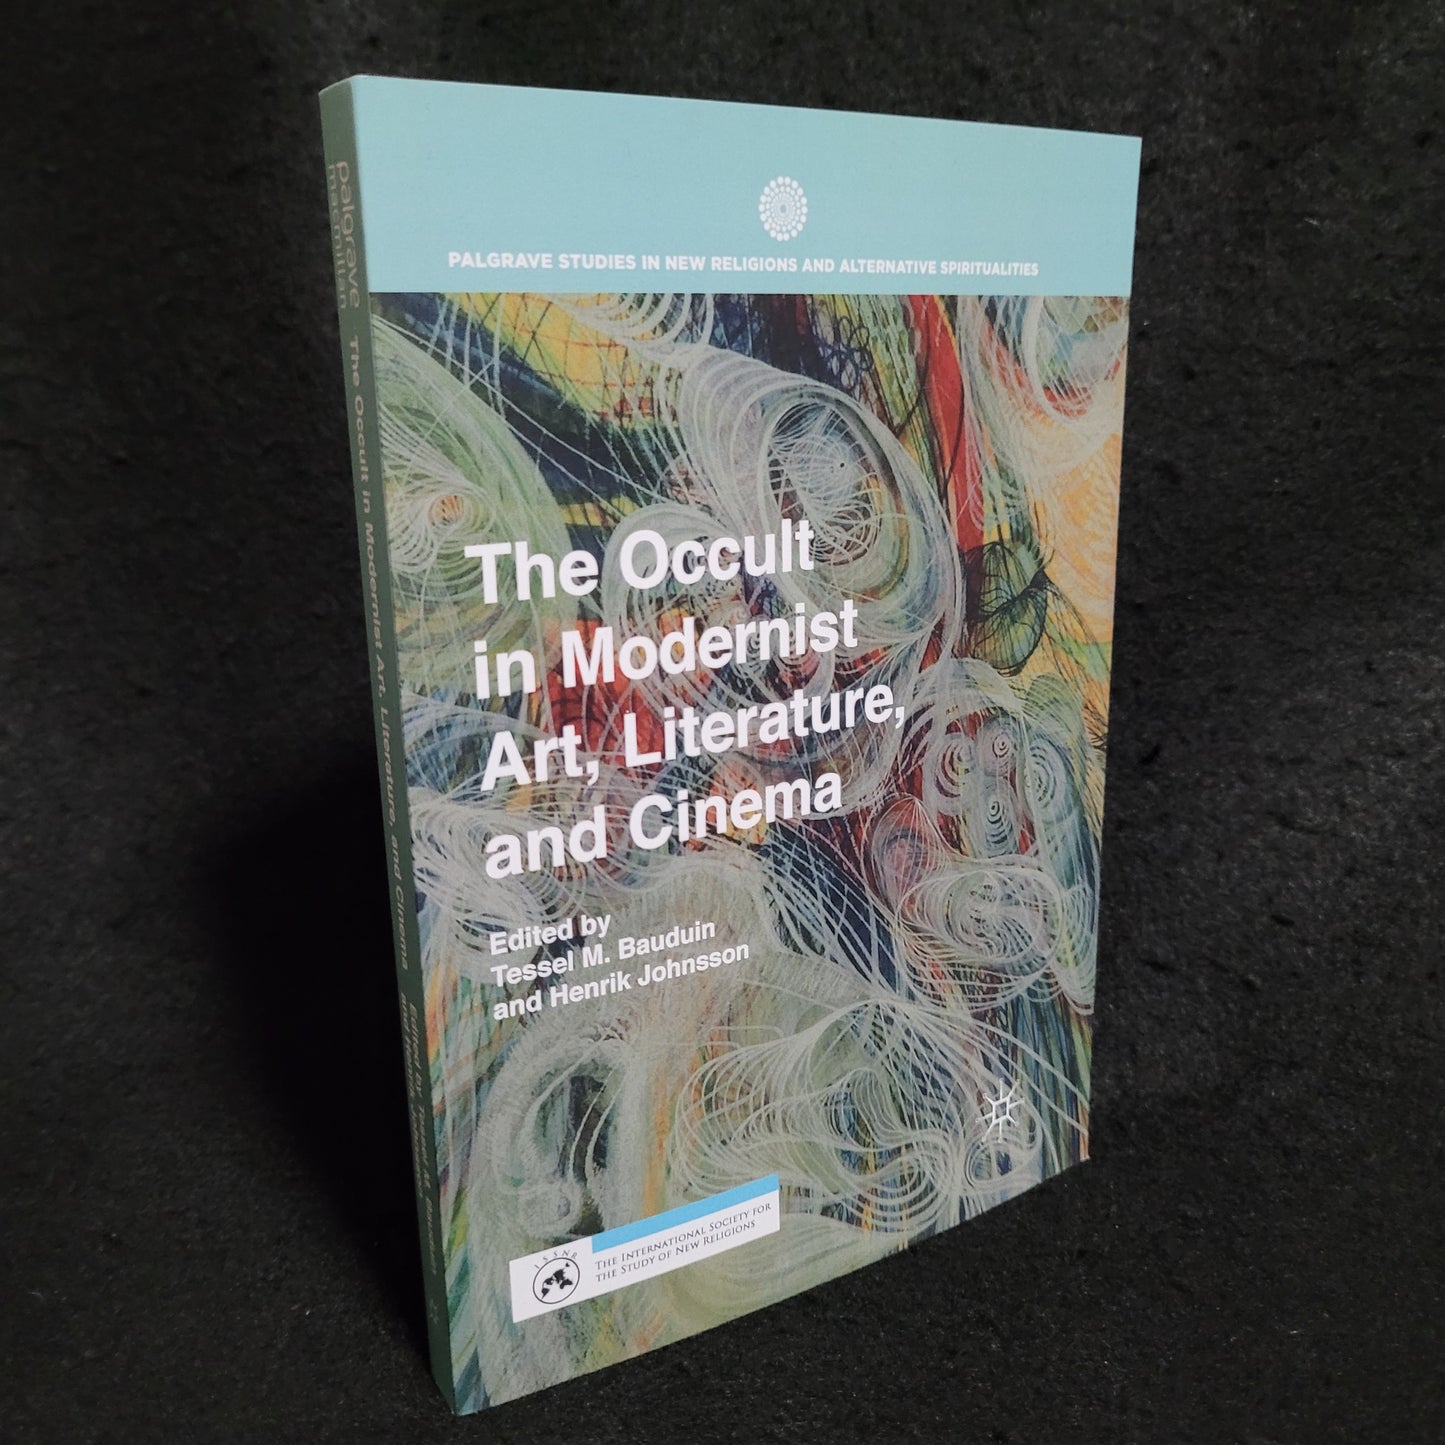 The Occult in Modernist Art, Literature, and Cinema edited by Tessel M. Bauduin and Henrik Johnsson (Palgrave Macmillan, 2018) Paperback Edition